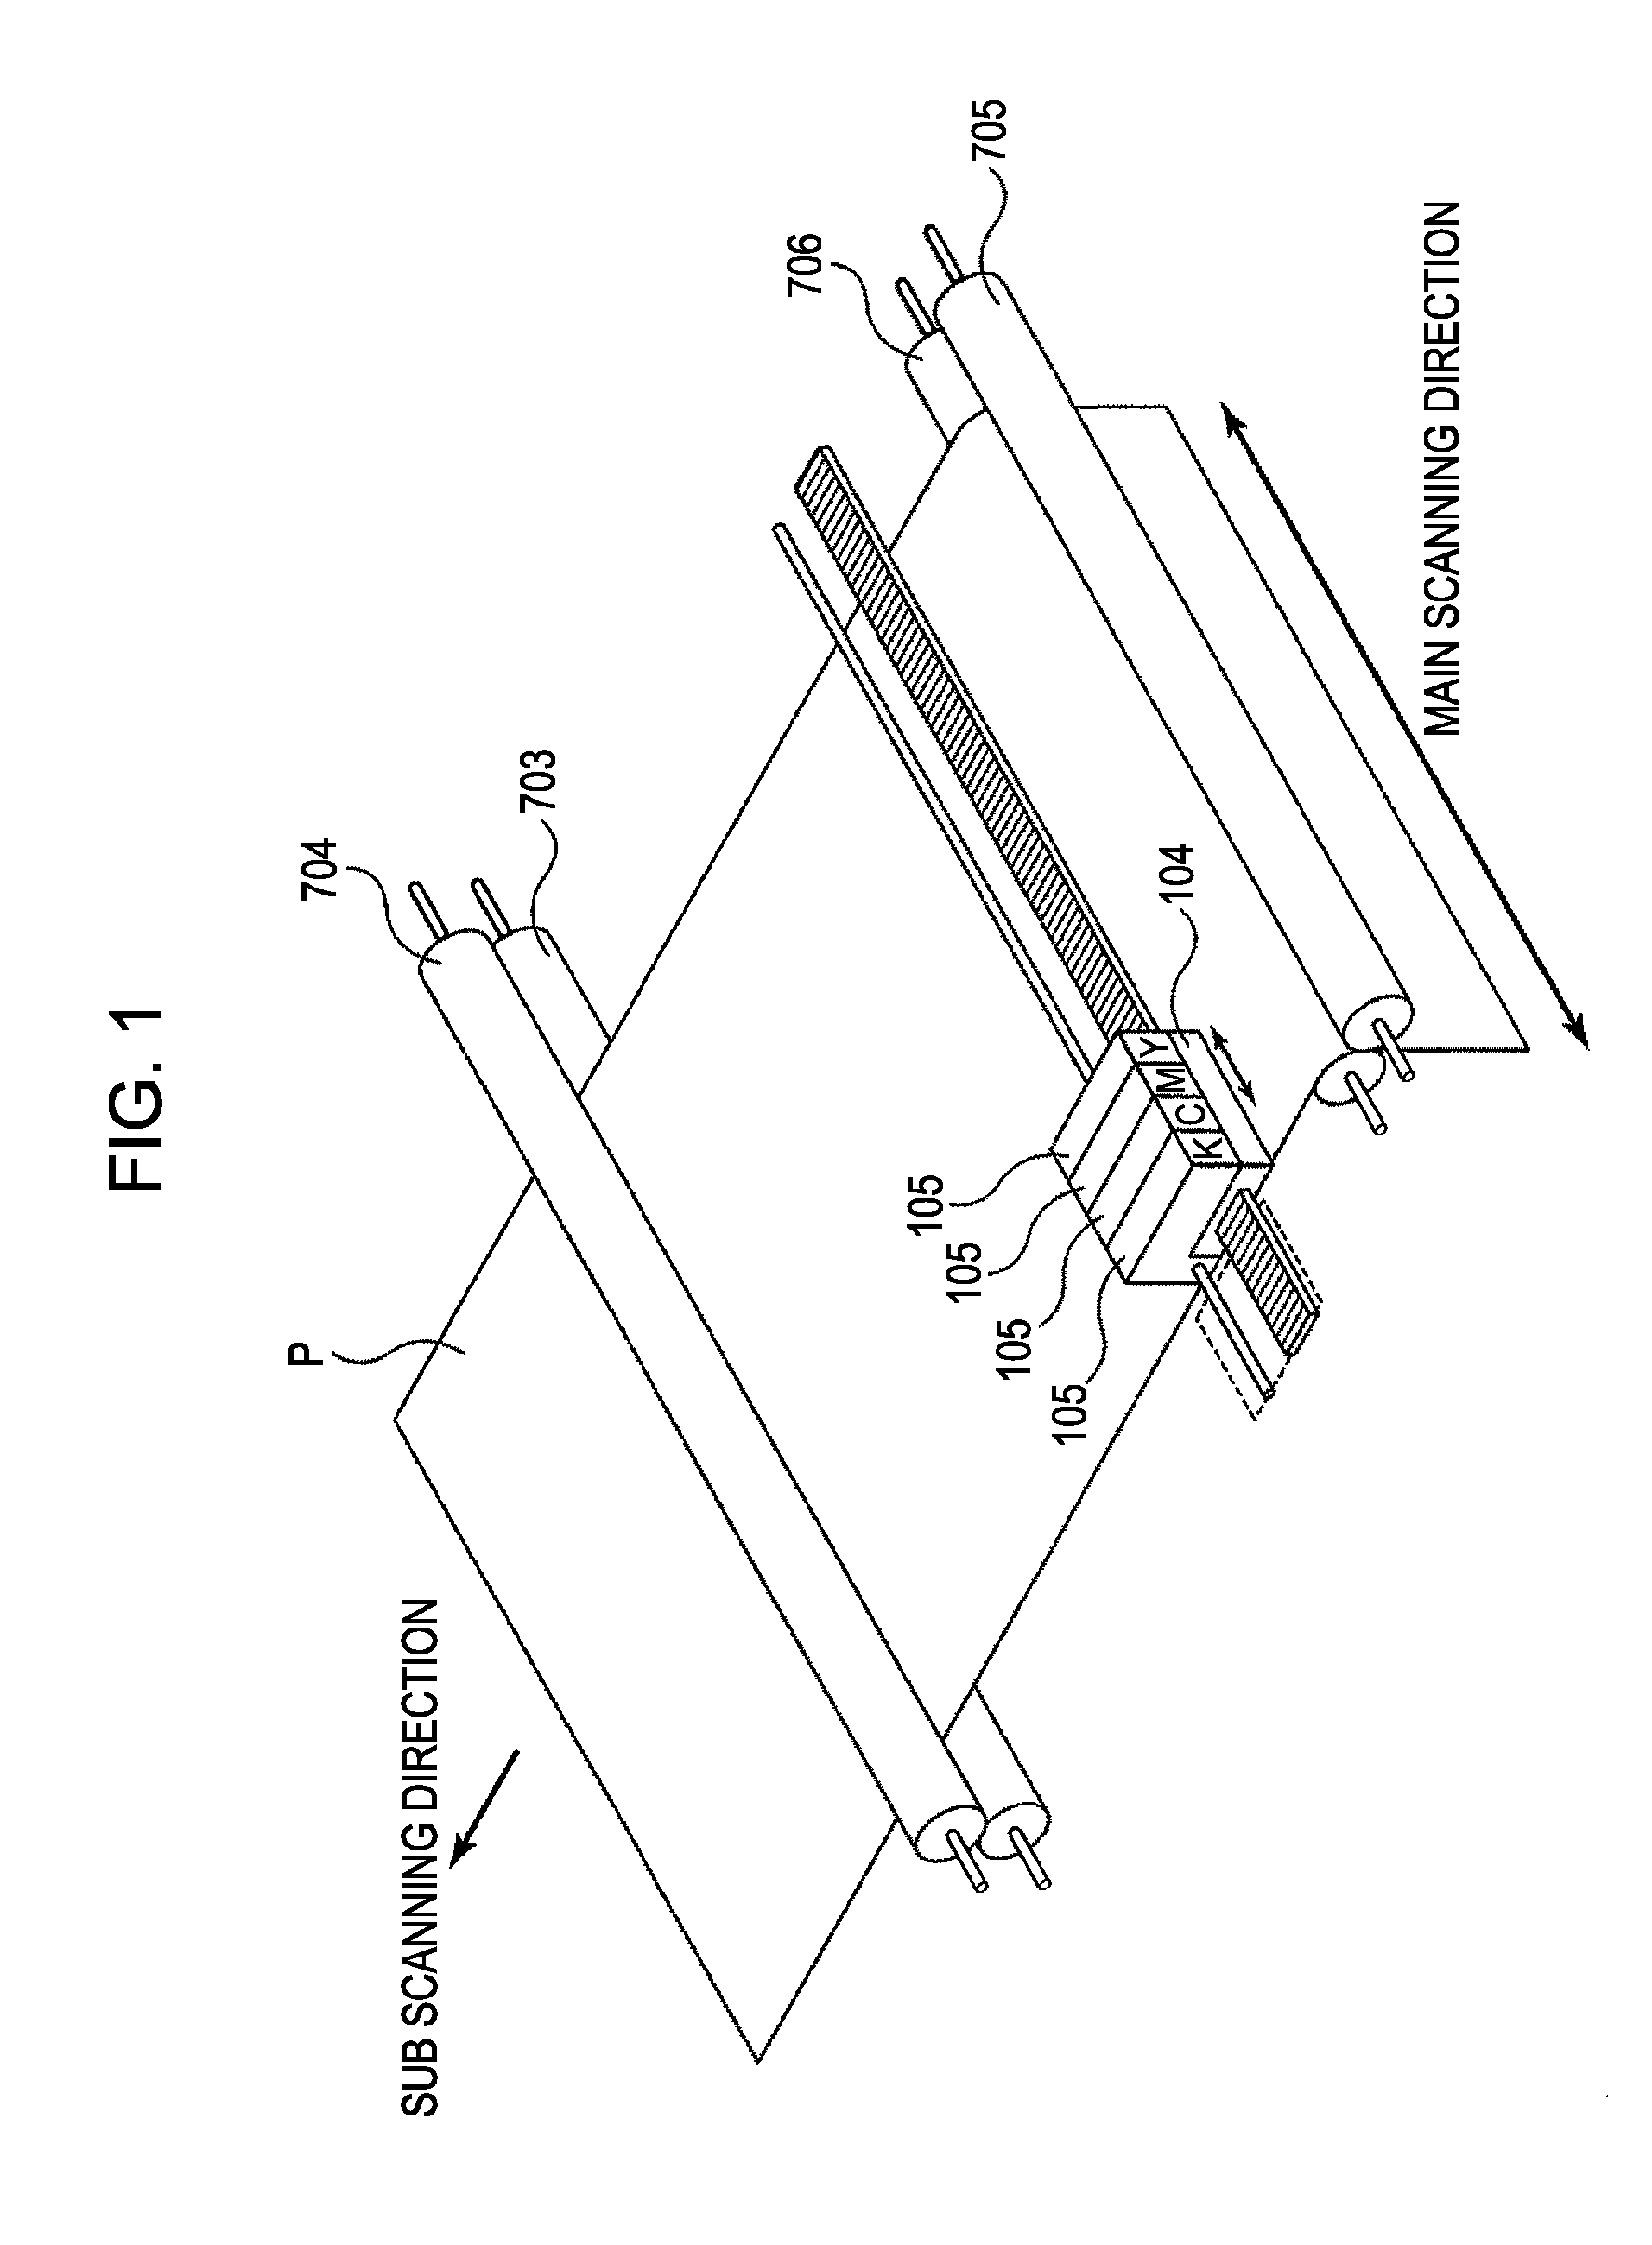 Image processing apparatus, image forming apparatus, and image processing method